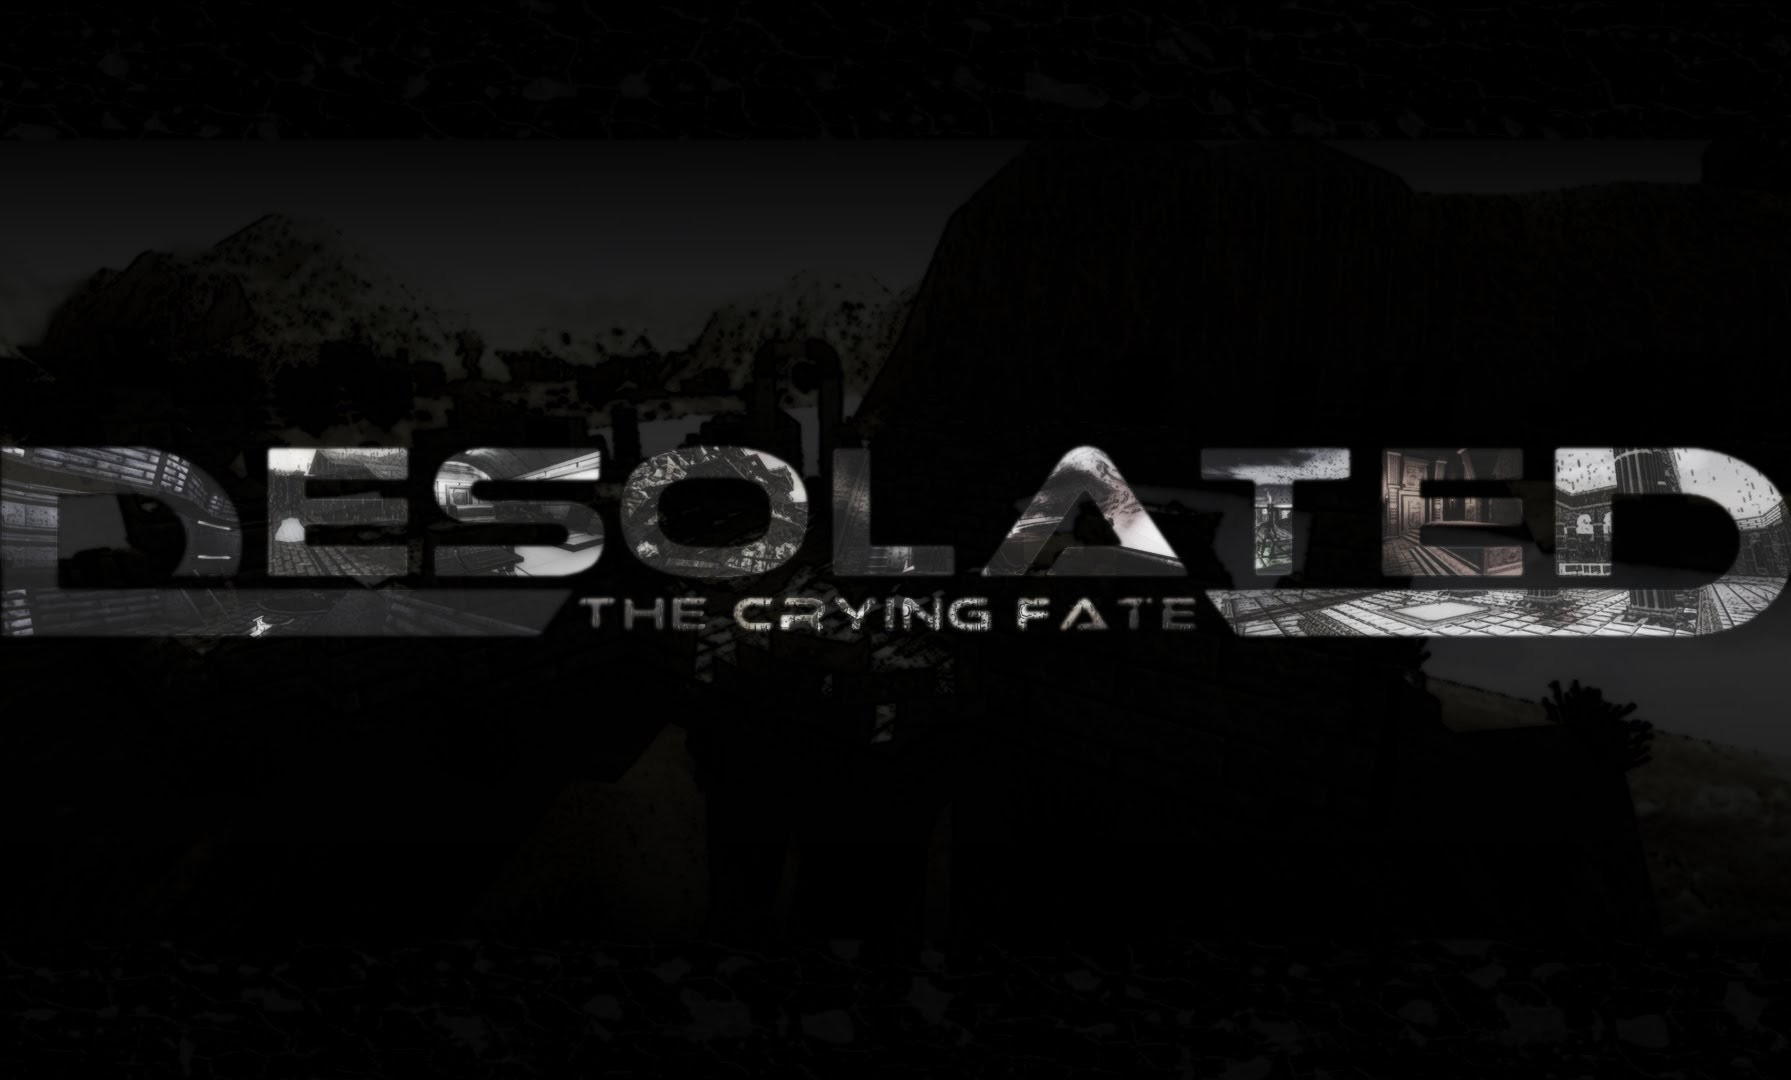 DESOLATED THE CRYING FATE